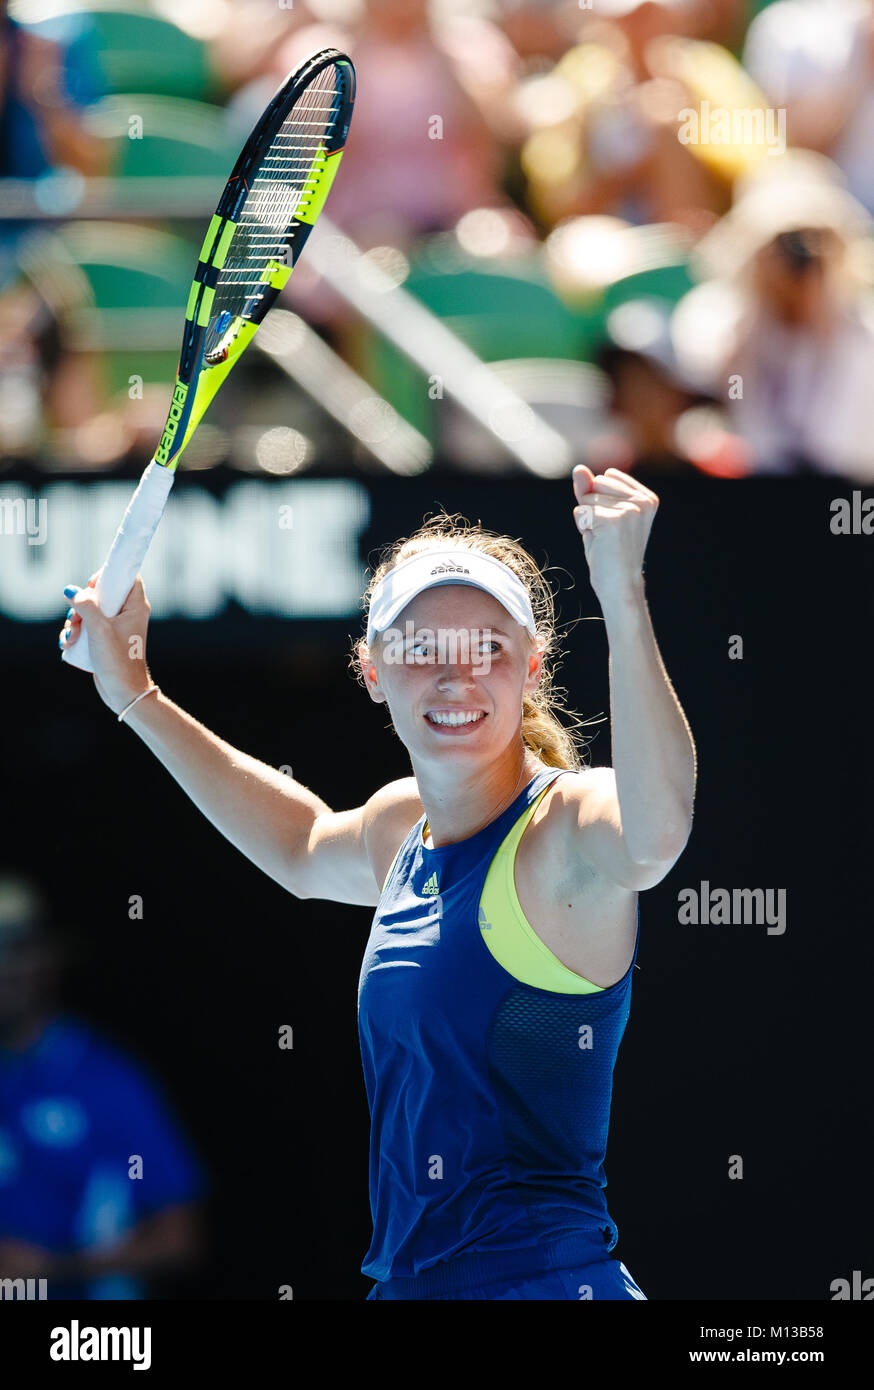 Melbourne, AUS, 26th January 2018: Danish tennis player Caroline Wozniacki in action during her semifinal the 2018 Australian Open at Melbourne Park. Credit: Frank Molter/Alamy Live News Stock Photo